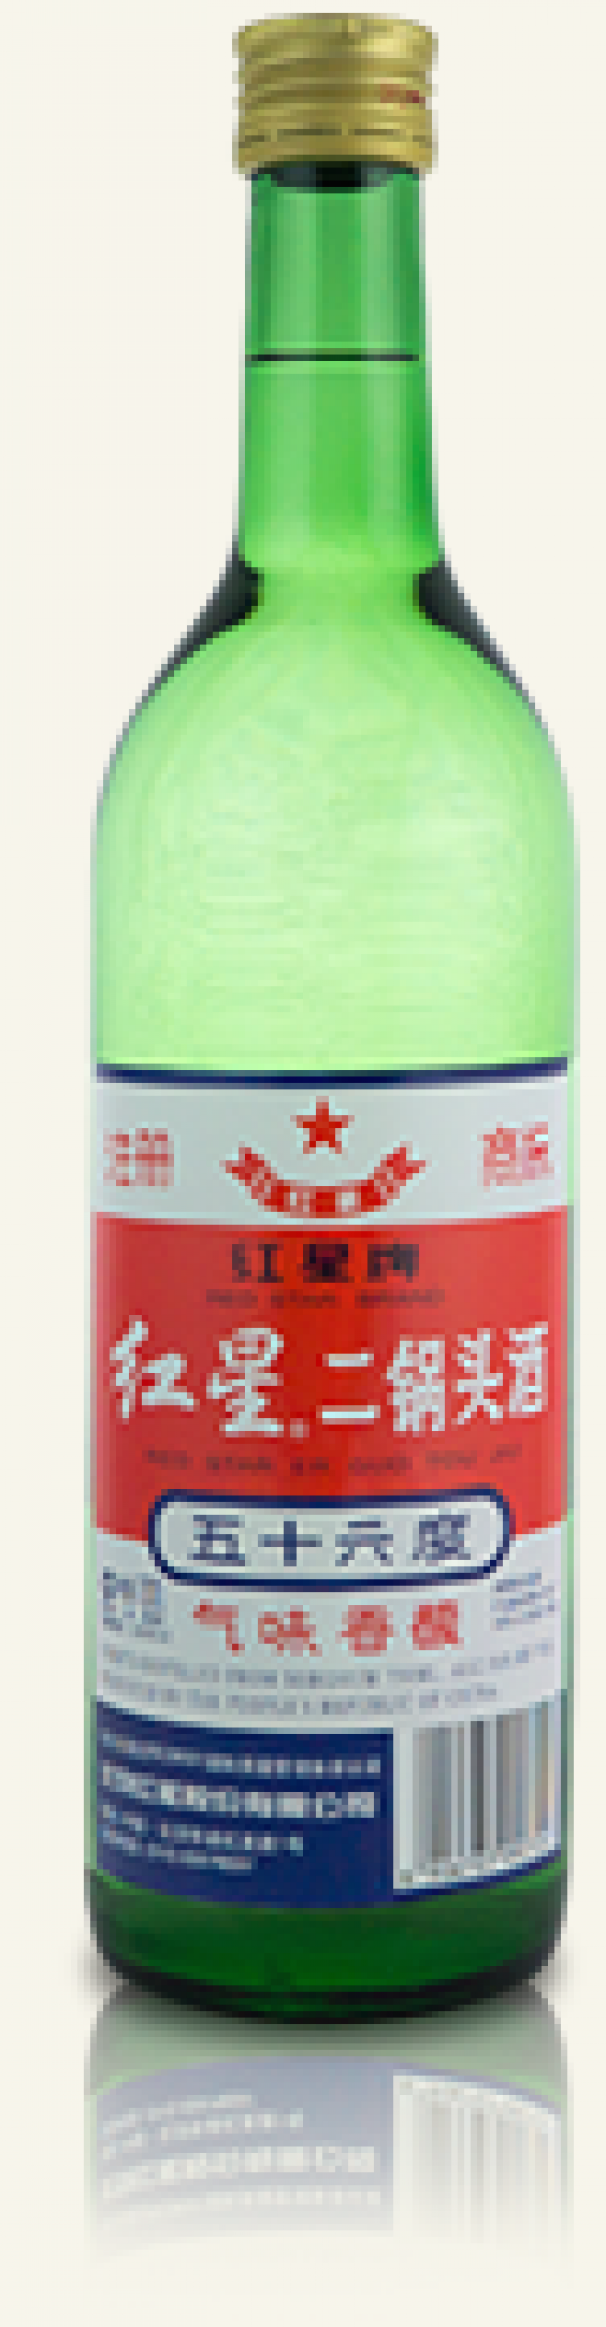 Red Star Brand Baiju Ratings and Tasting Notes - The Seattle Spirits Society